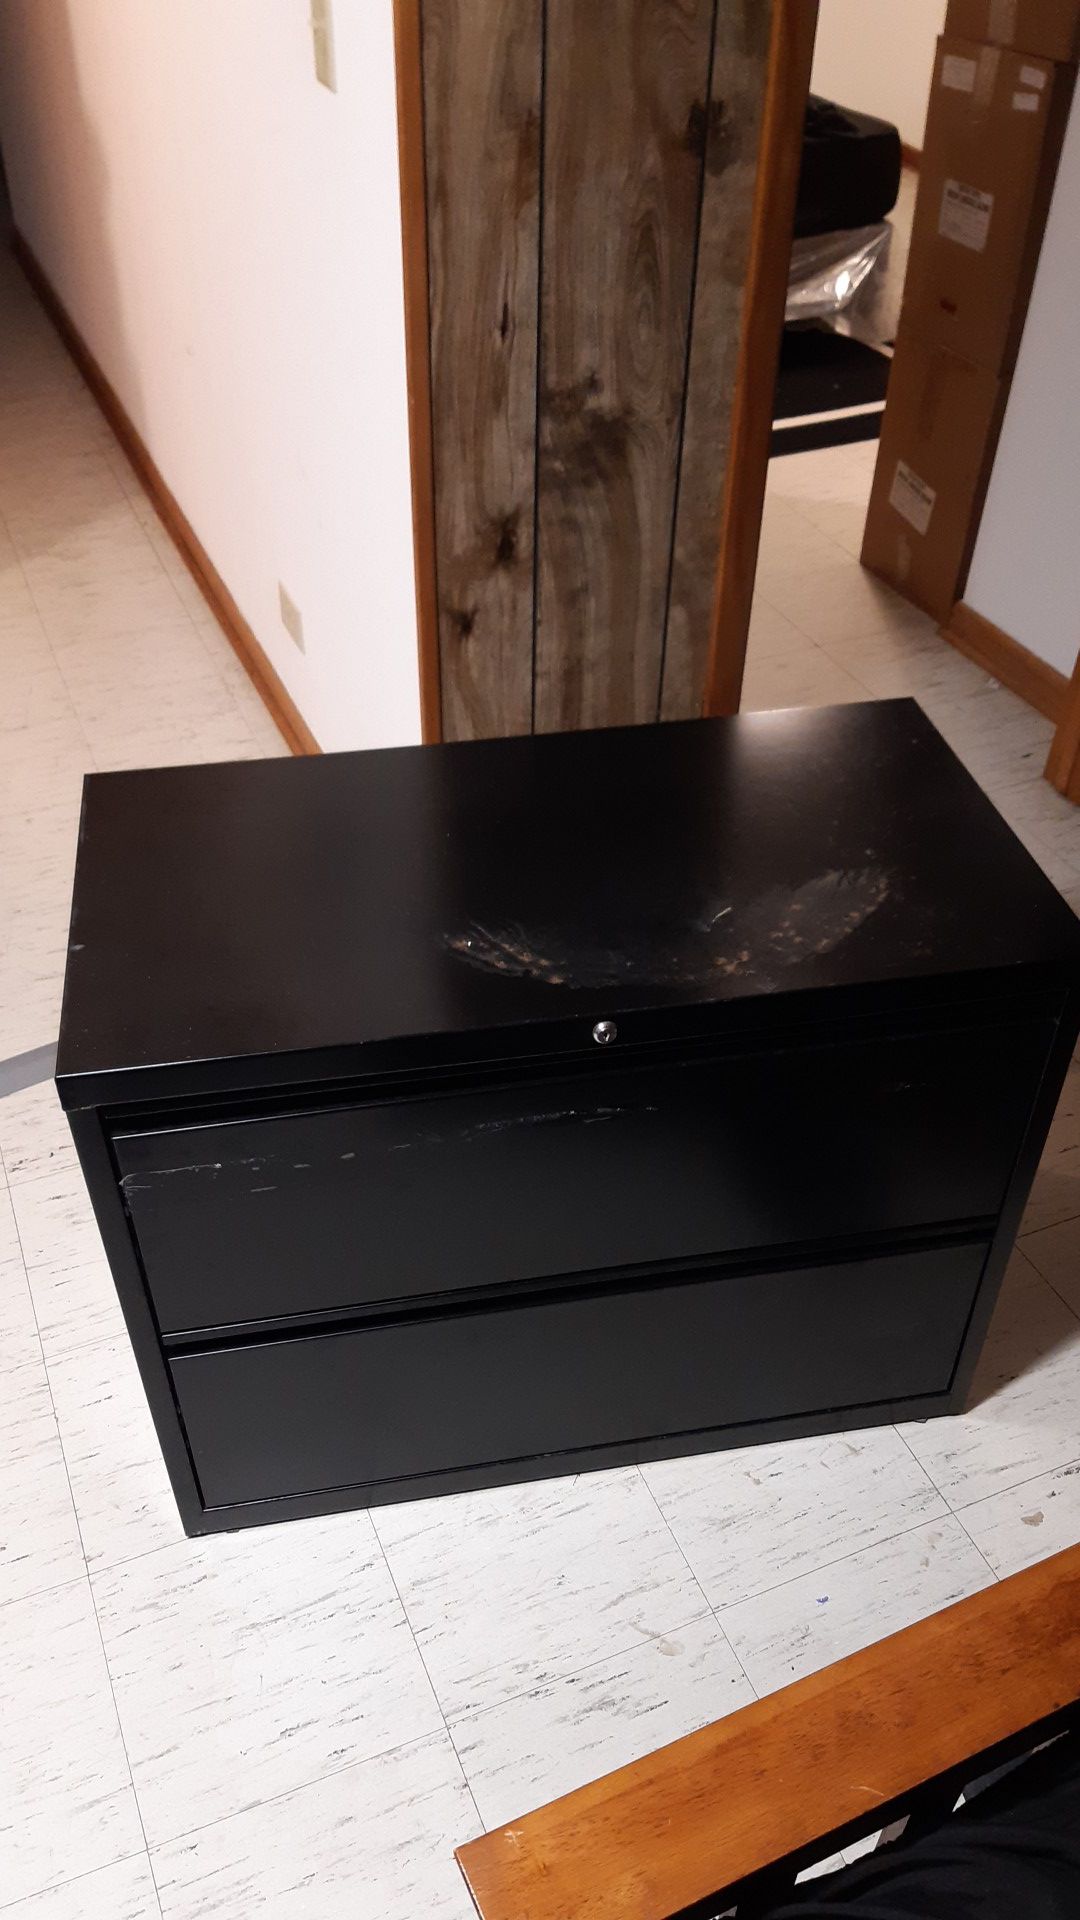 2 Drawer All metal file cabinet tiles on the floor are 12 x 12 so you get an idea how big it is